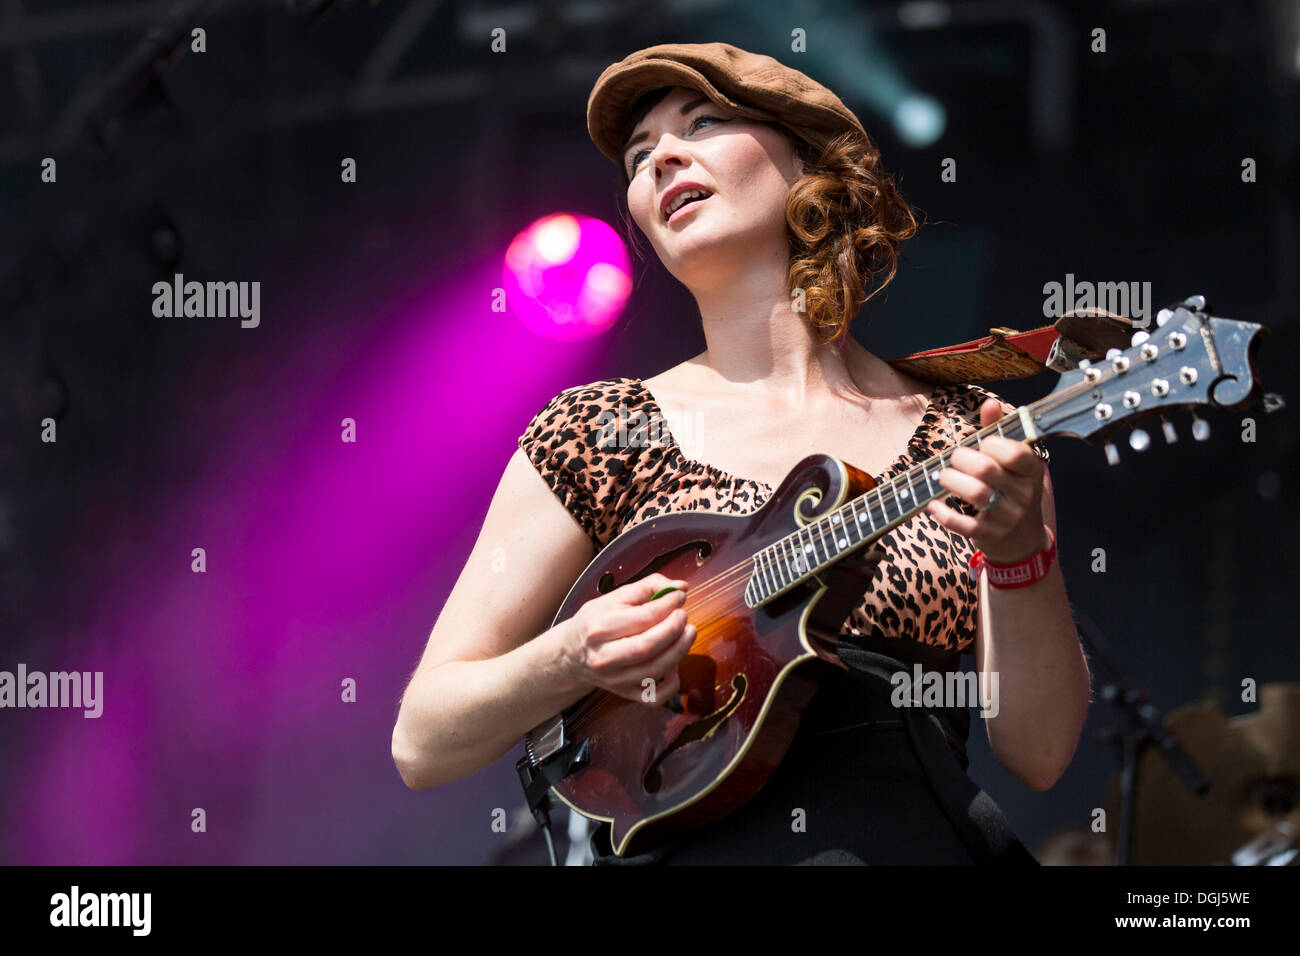 Anne Marit Bergheim with a mandolin from the Norwegian girl band Katzenjammer performing live at Heitere Open Air in Zofingen Stock Photo